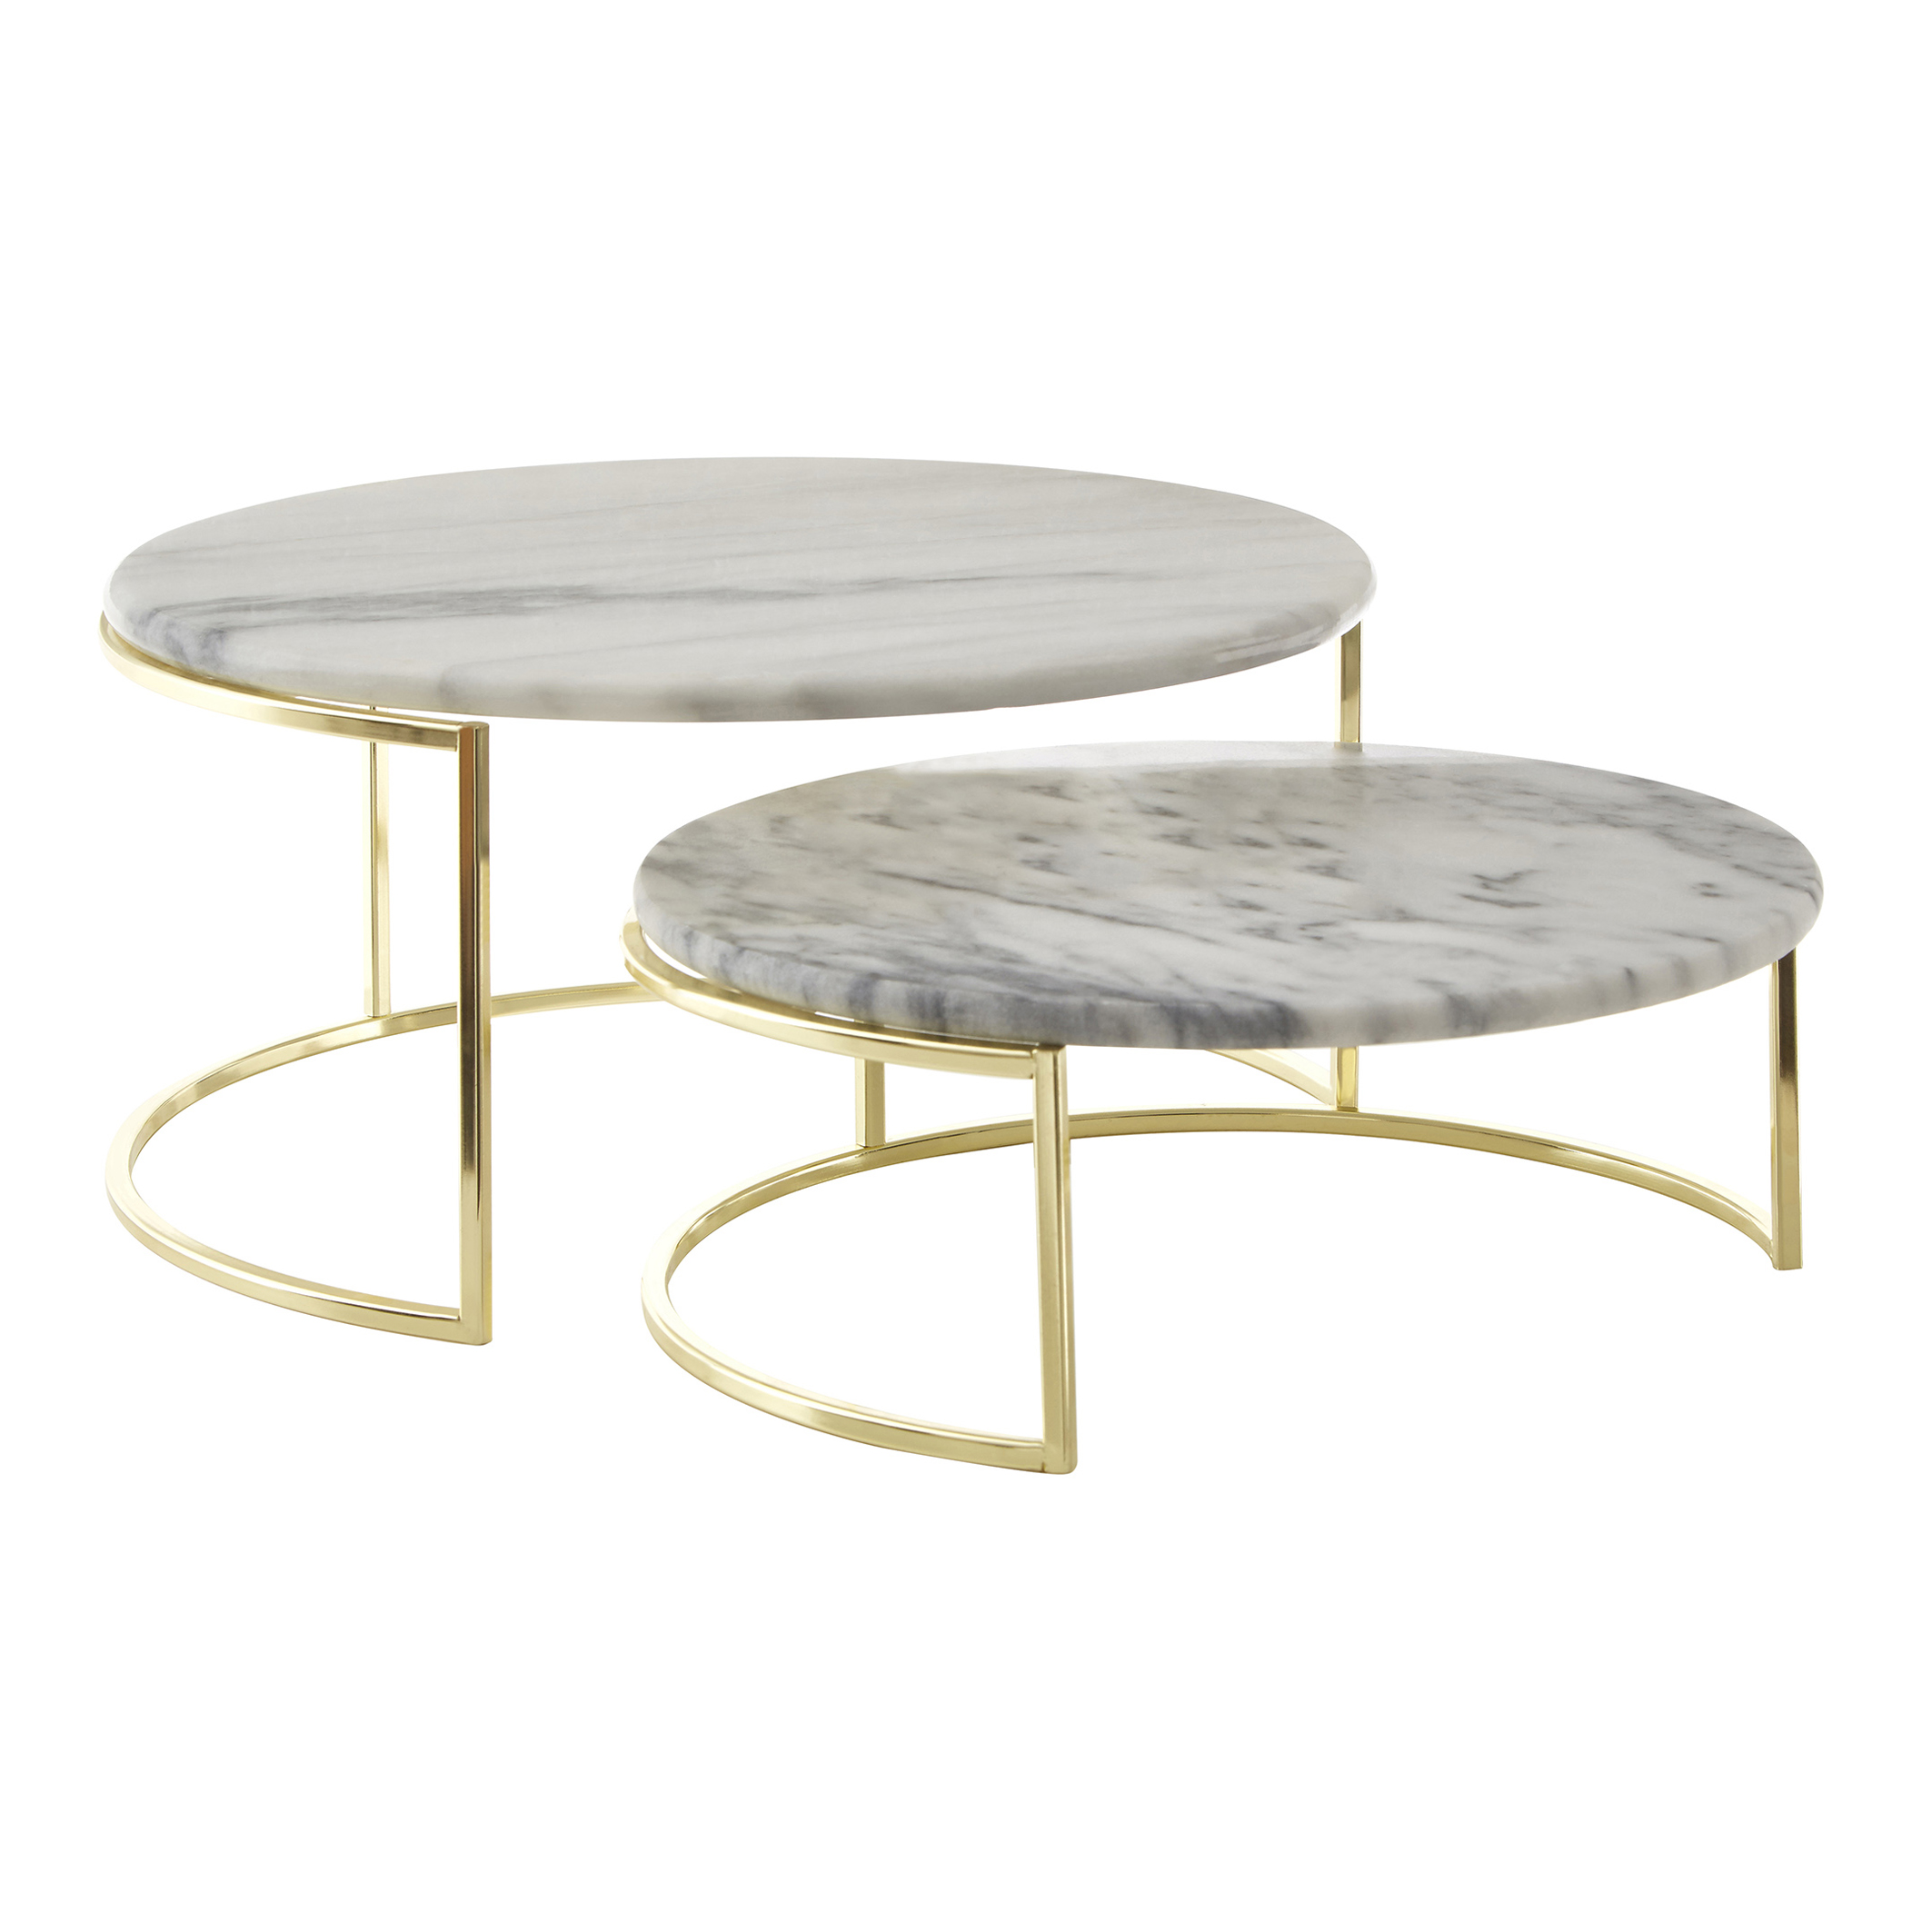 Amazon.com | IMAX Lissa Marble Cake Stand in White – Handcrafted Cake  Pedestal, Marble and Mango Wood Display Table for Presenting Cakes,  Pastries, Desserts. Cake Stands: Cake Stands